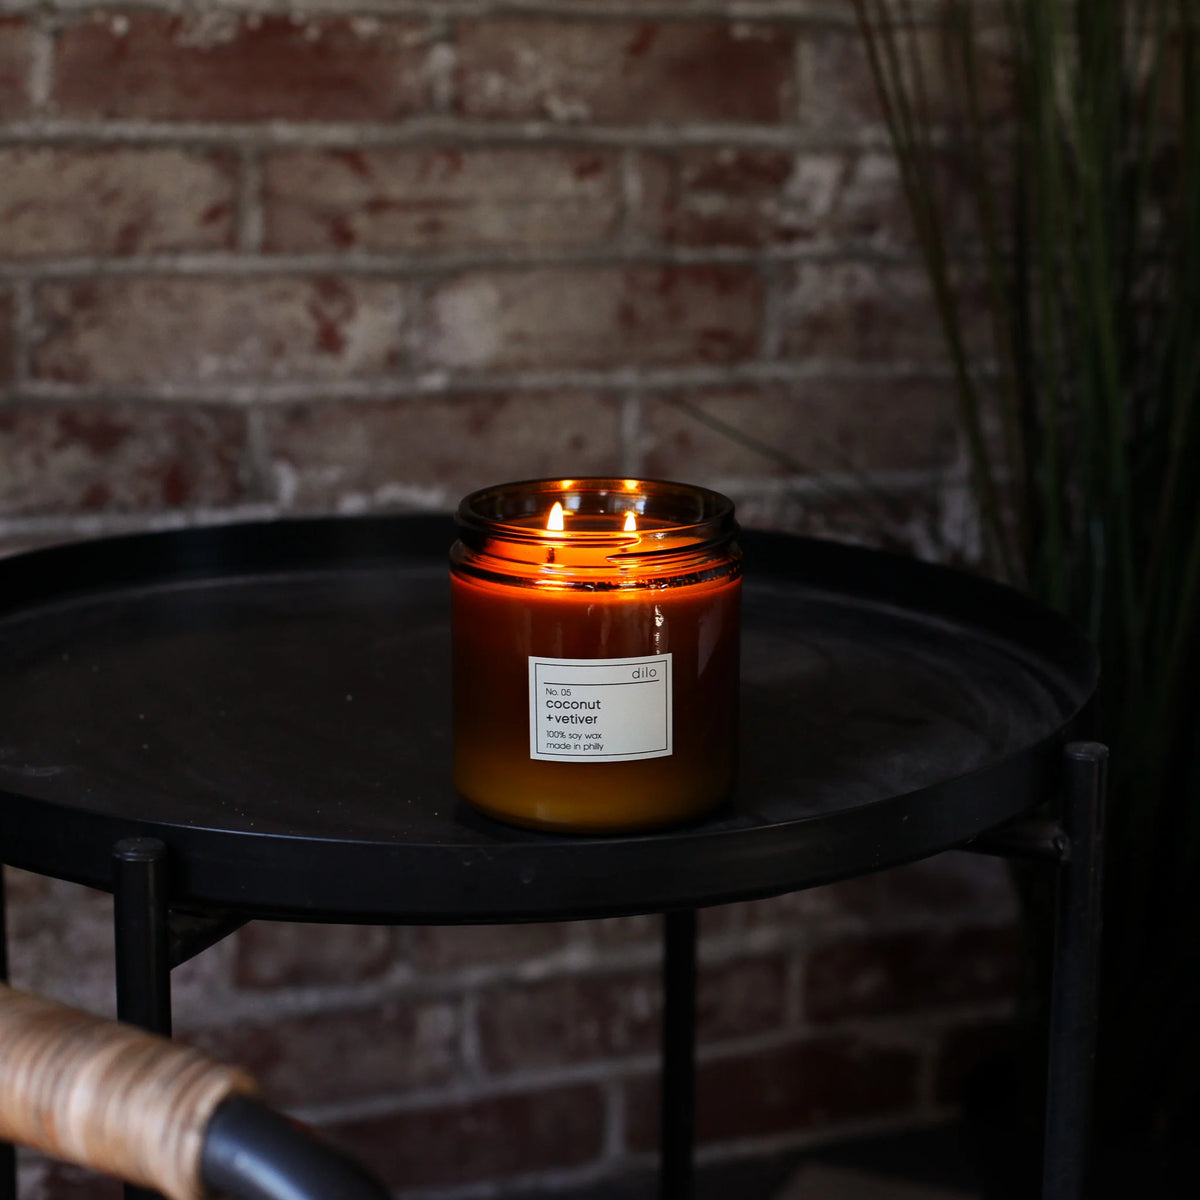 Dilo Coconut + Vetiver Candle